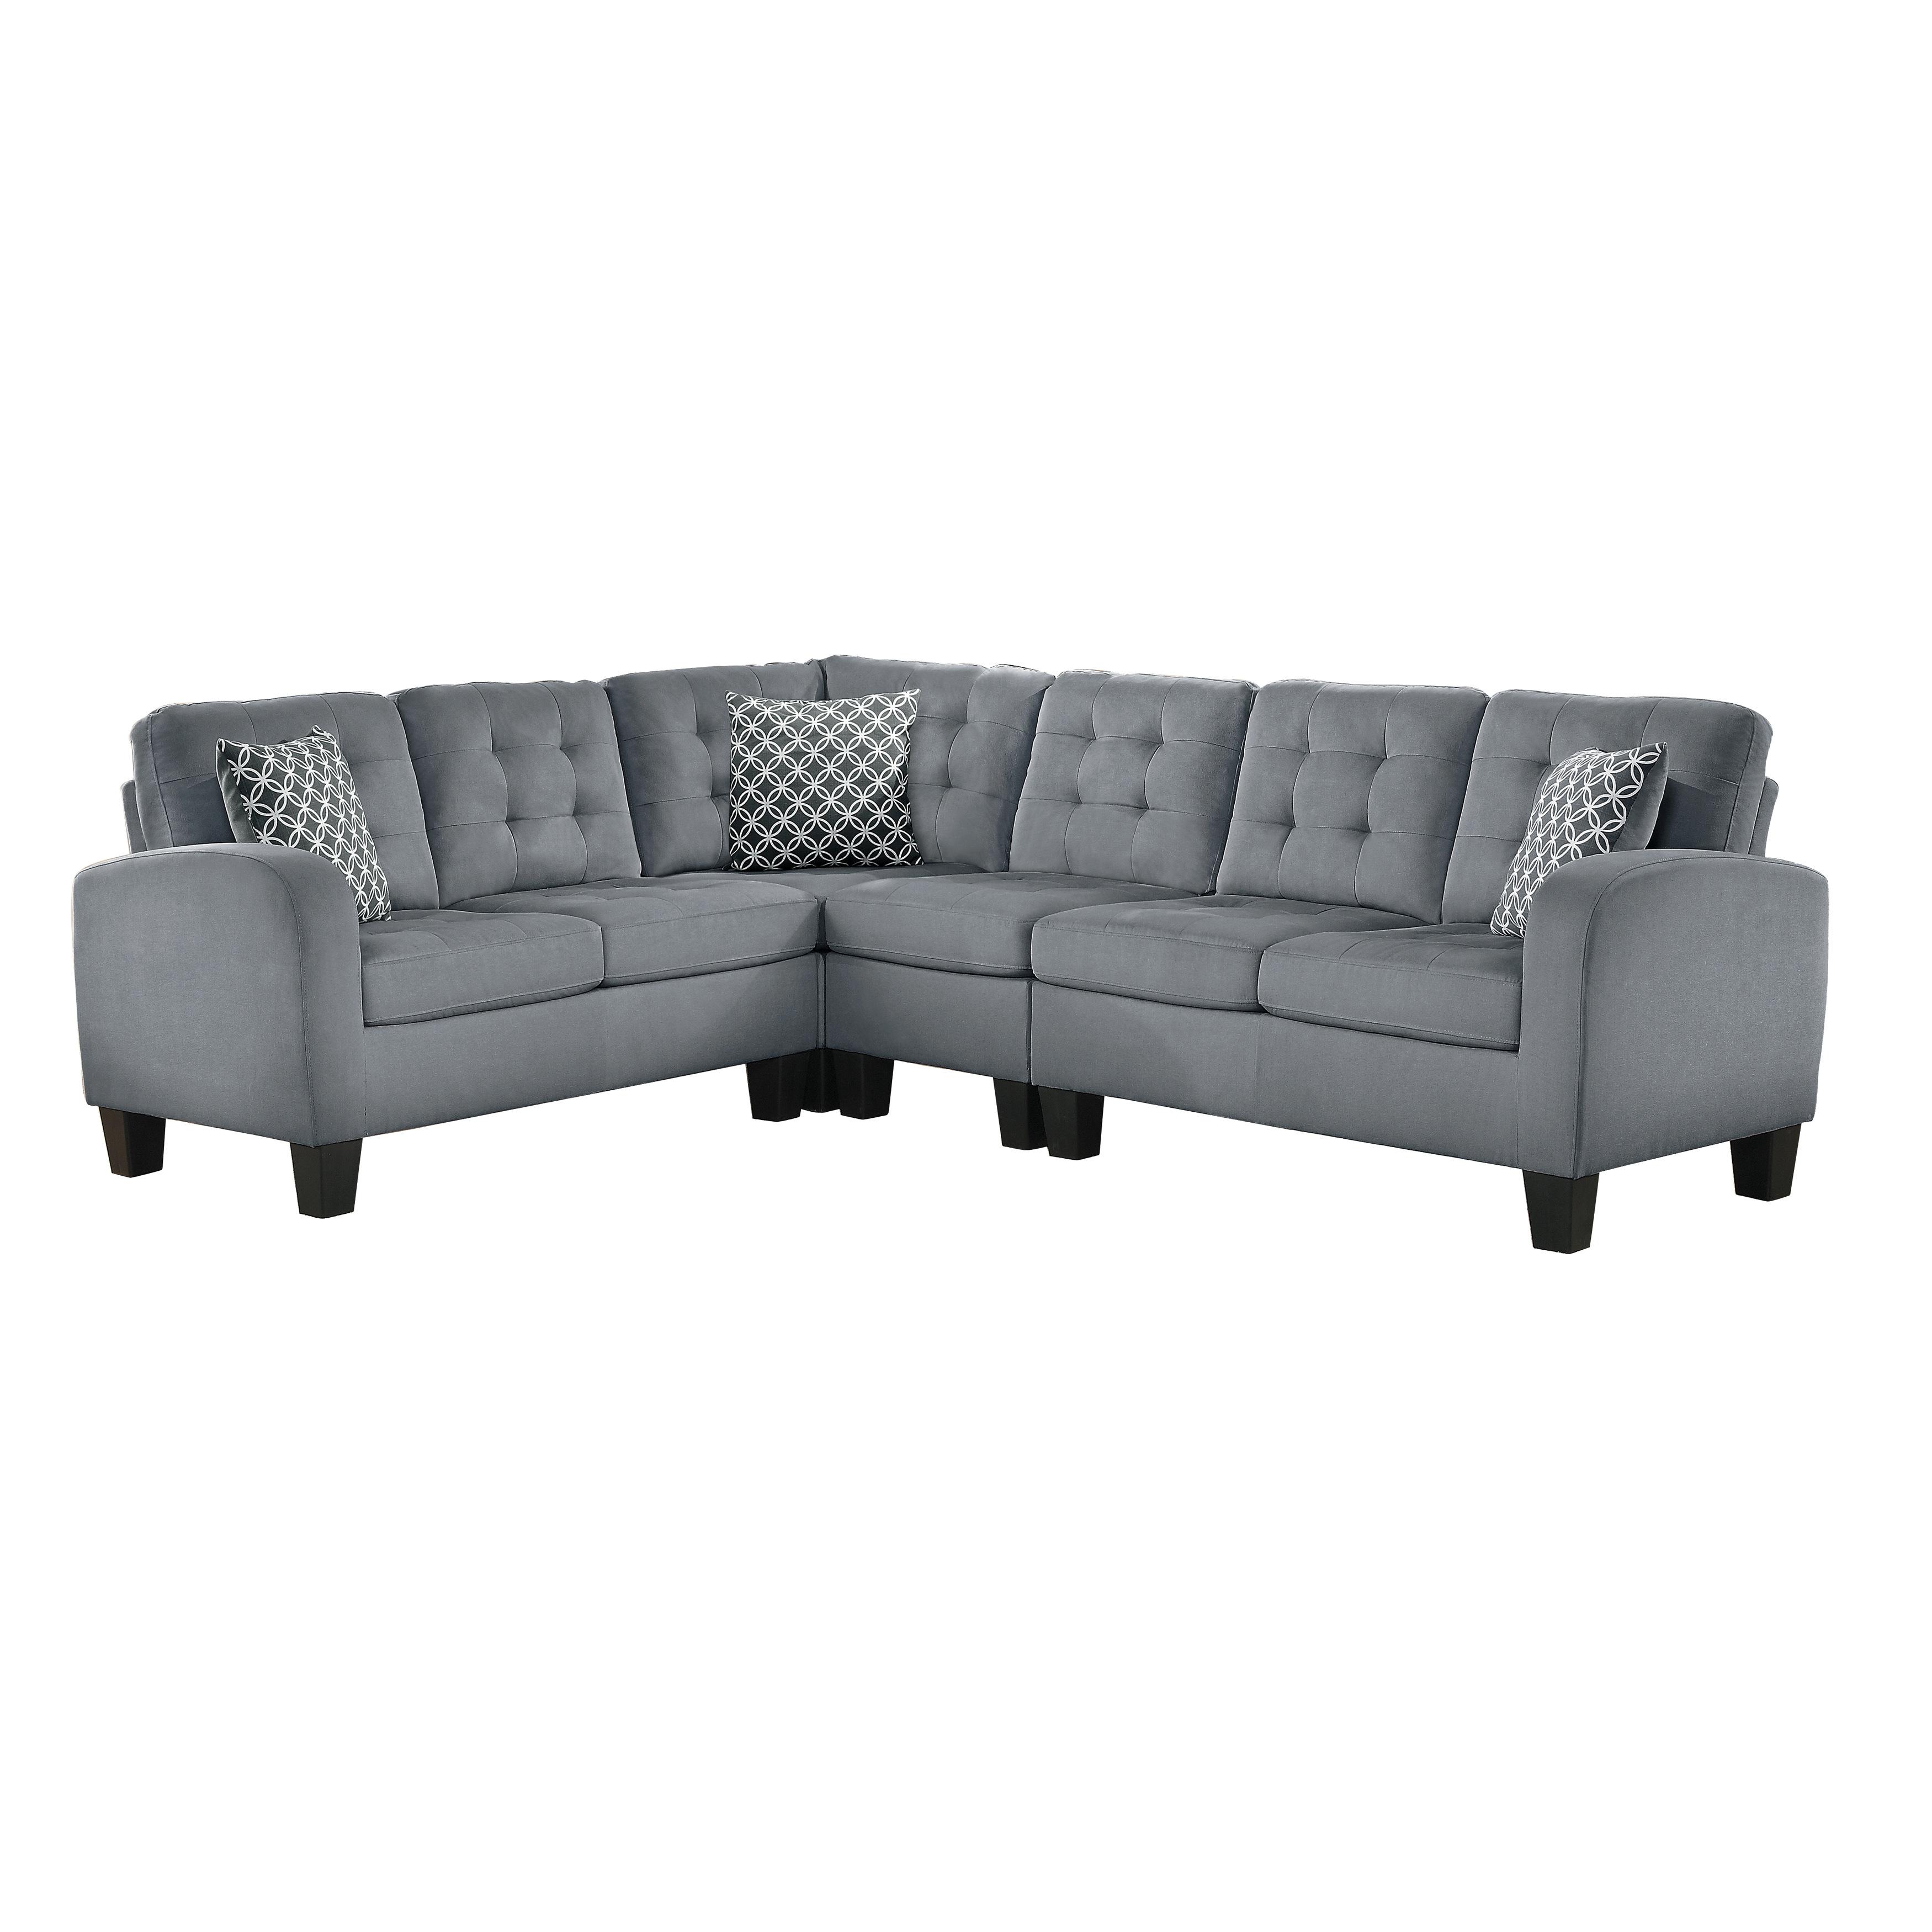 Classic Sectional 8202GRY*SC Sinclair 8202GRY*SC in Gray 